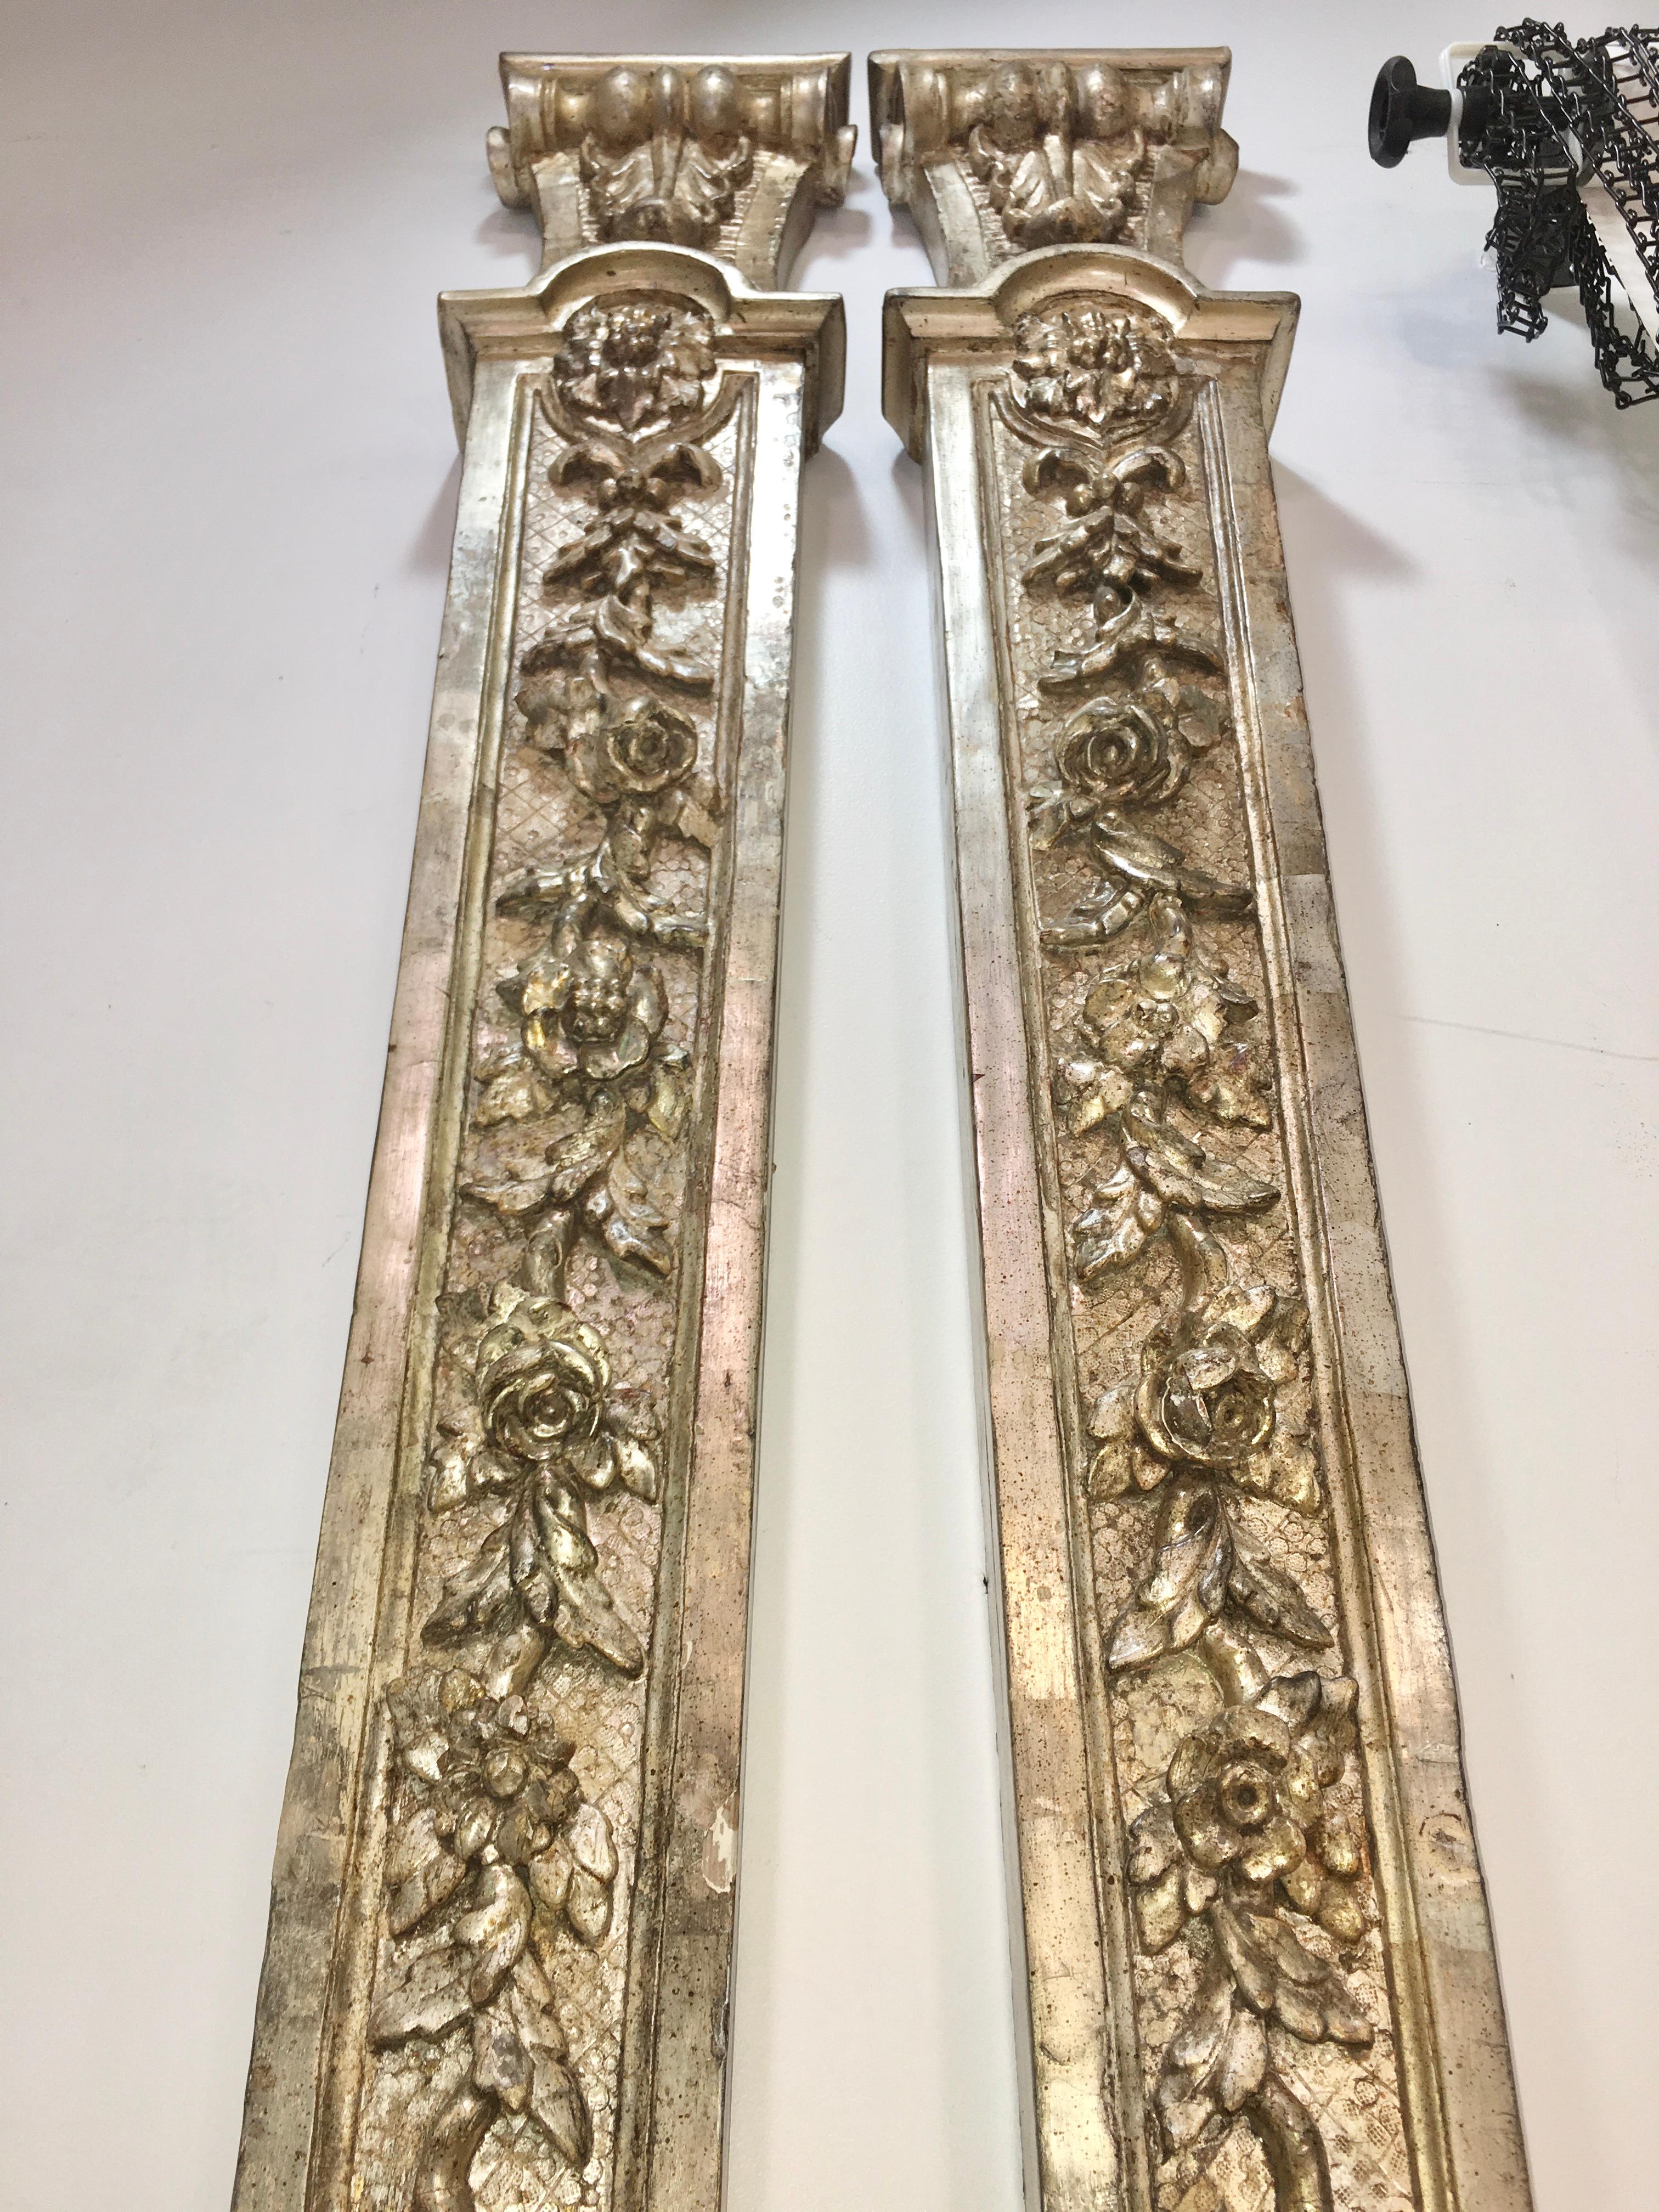 Pair of Antique Silver Giltwood Regency Style Pilasters In Good Condition For Sale In Hanover, MA